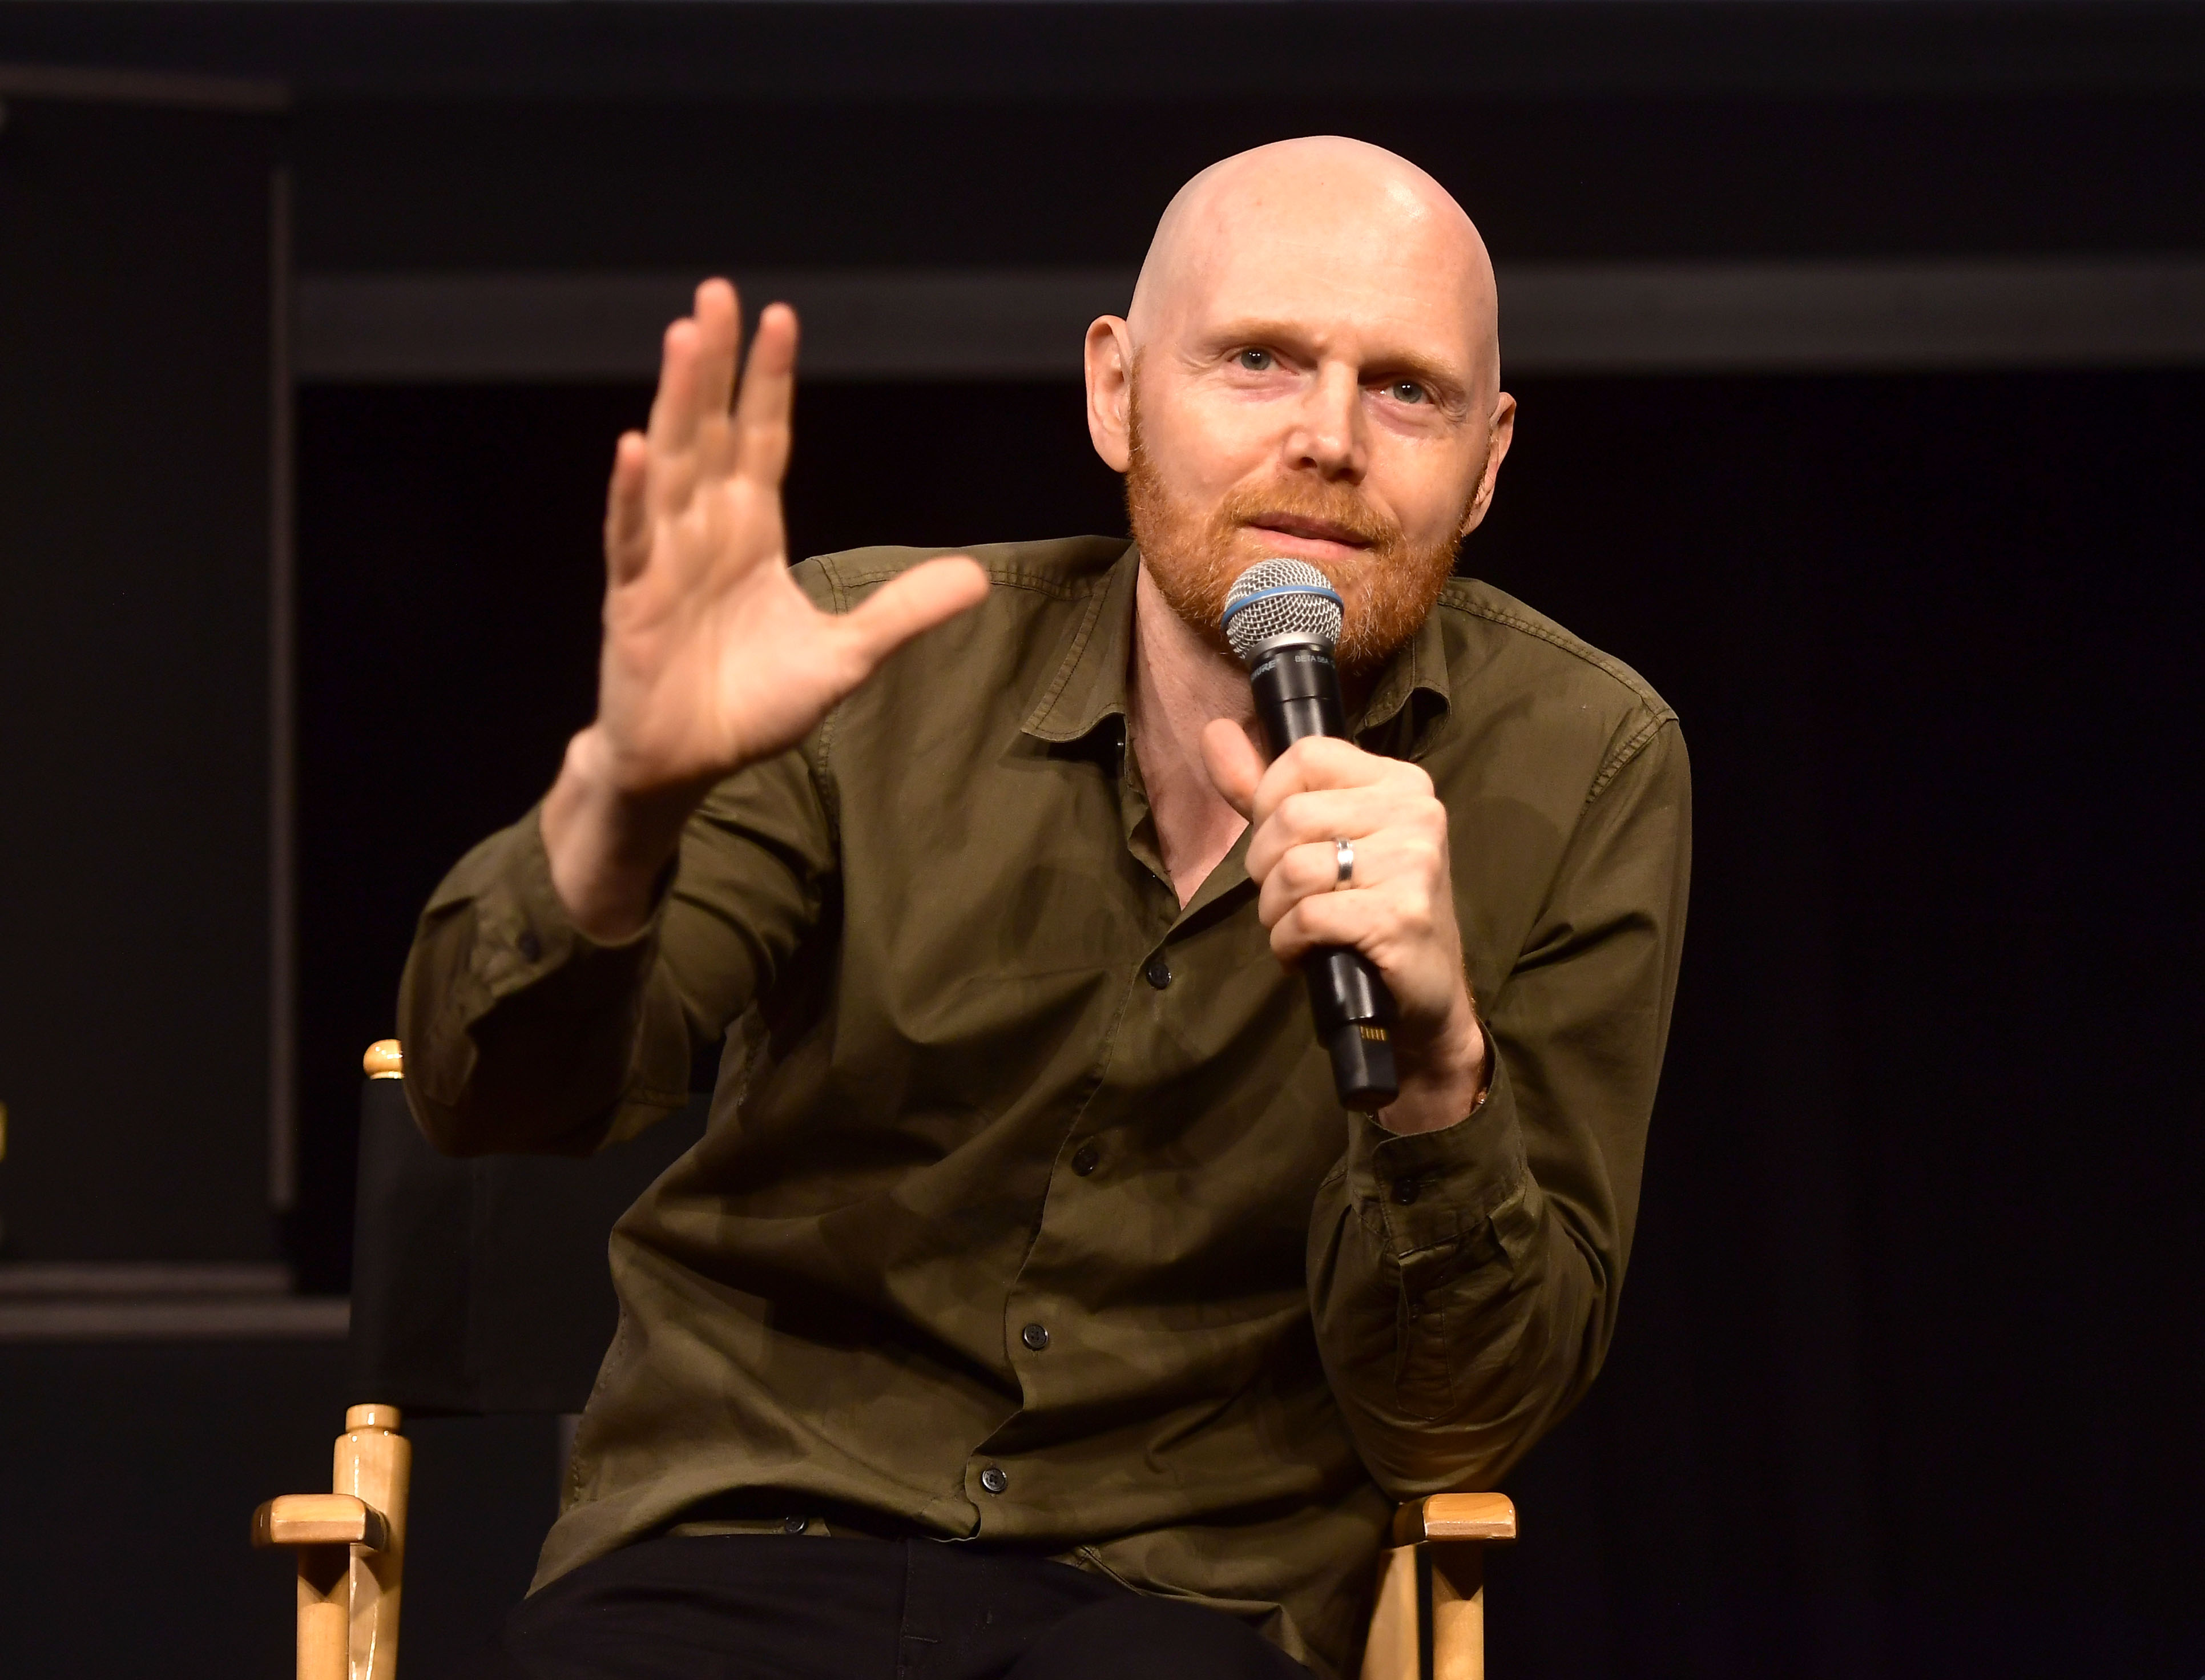 'Did Bill Burr Really Just Say That?' Mixed Reactions Follow